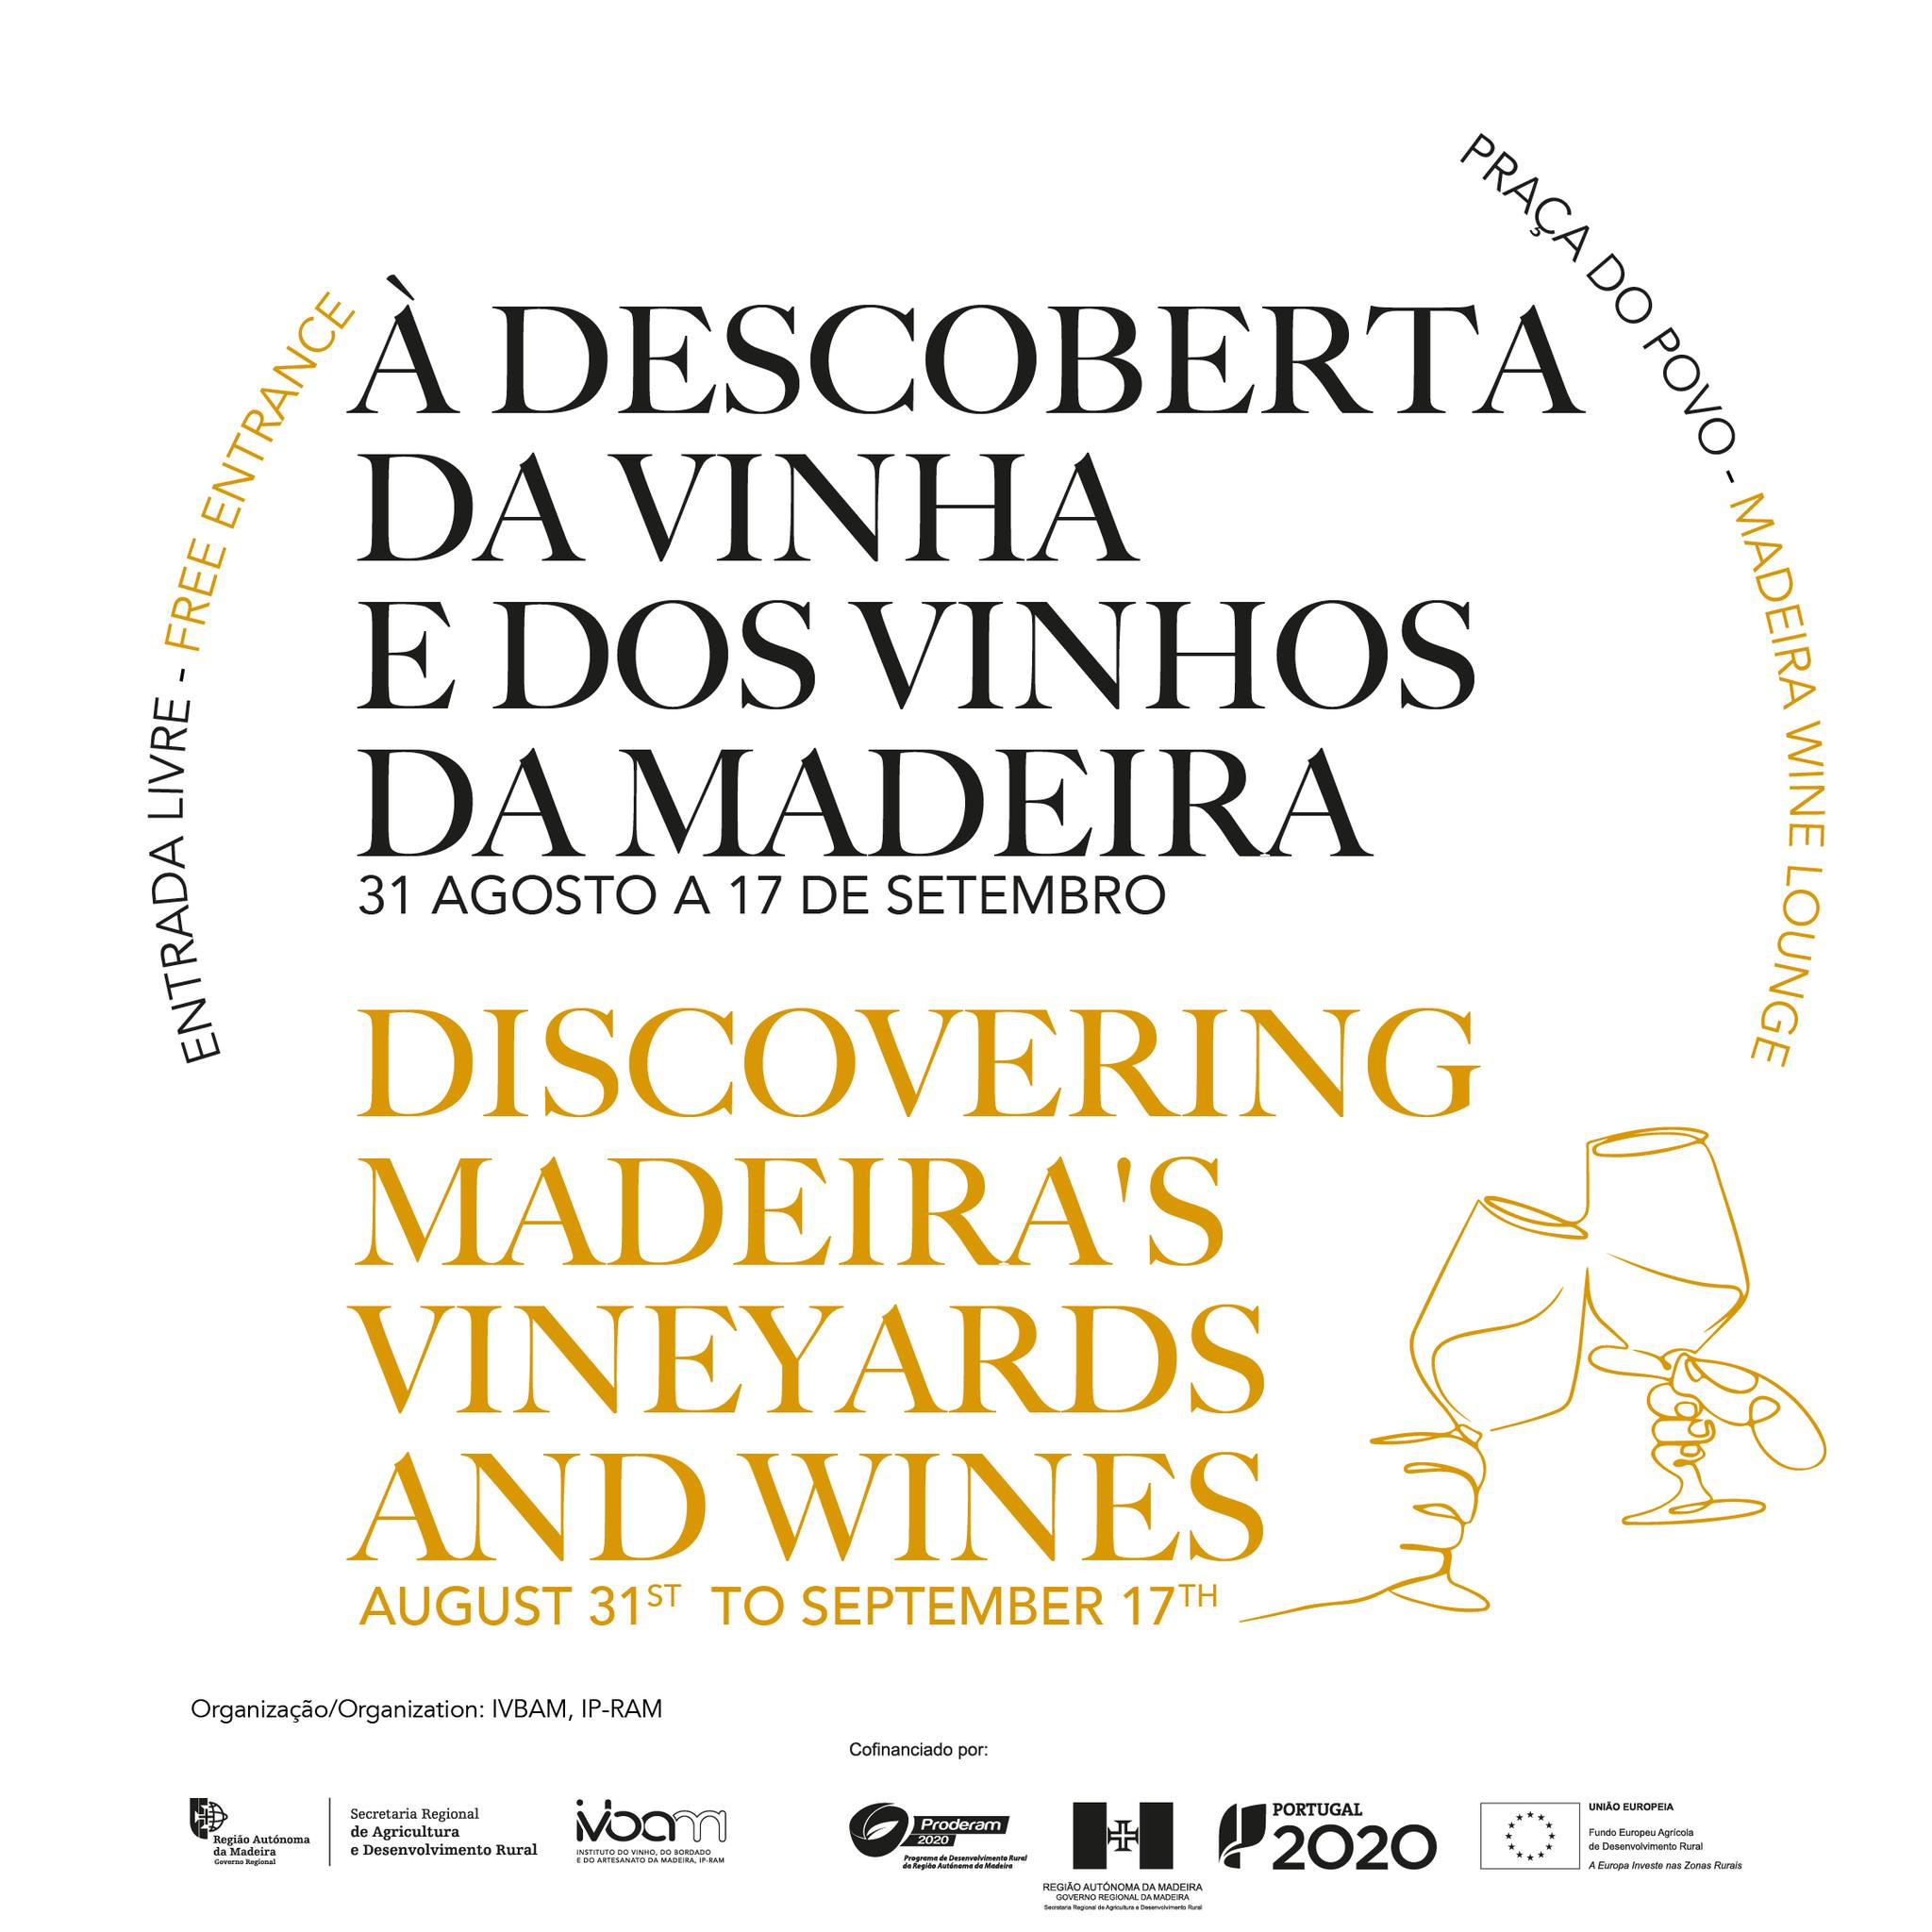 "Discovering Madeira's Vine and Wines"